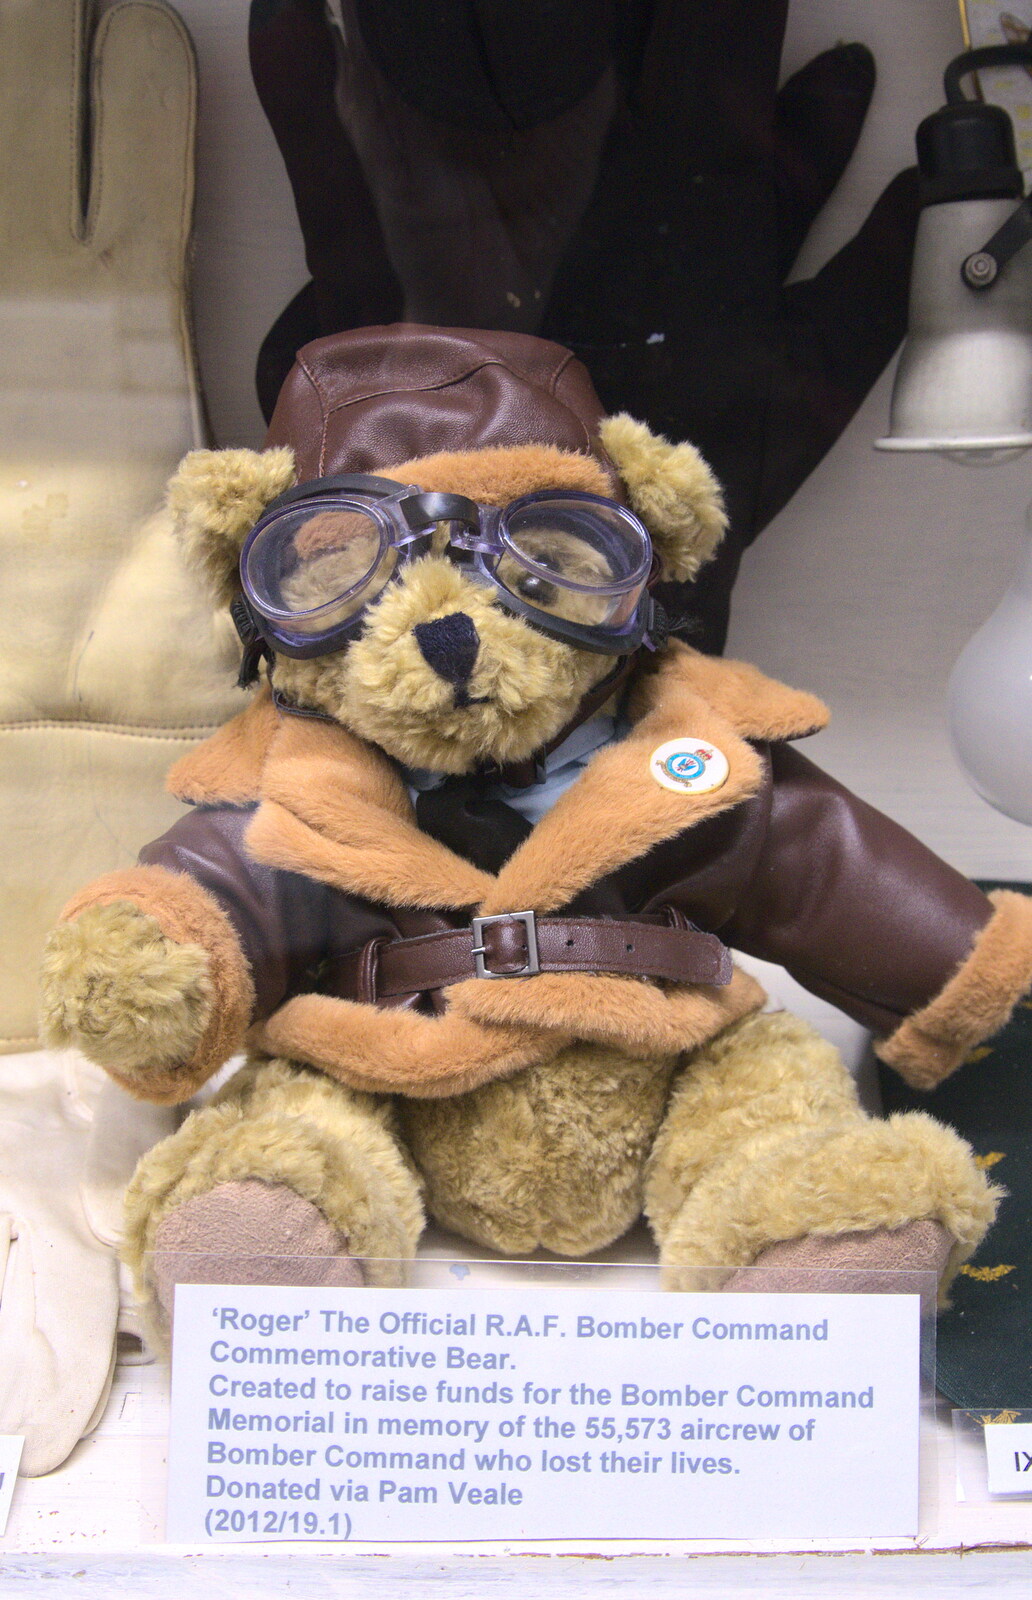 Roger, the official RAF Bomber Command bear from Norfolk and Suffolk Aviation Museum, Flixton, Suffolk - 30th April 2017